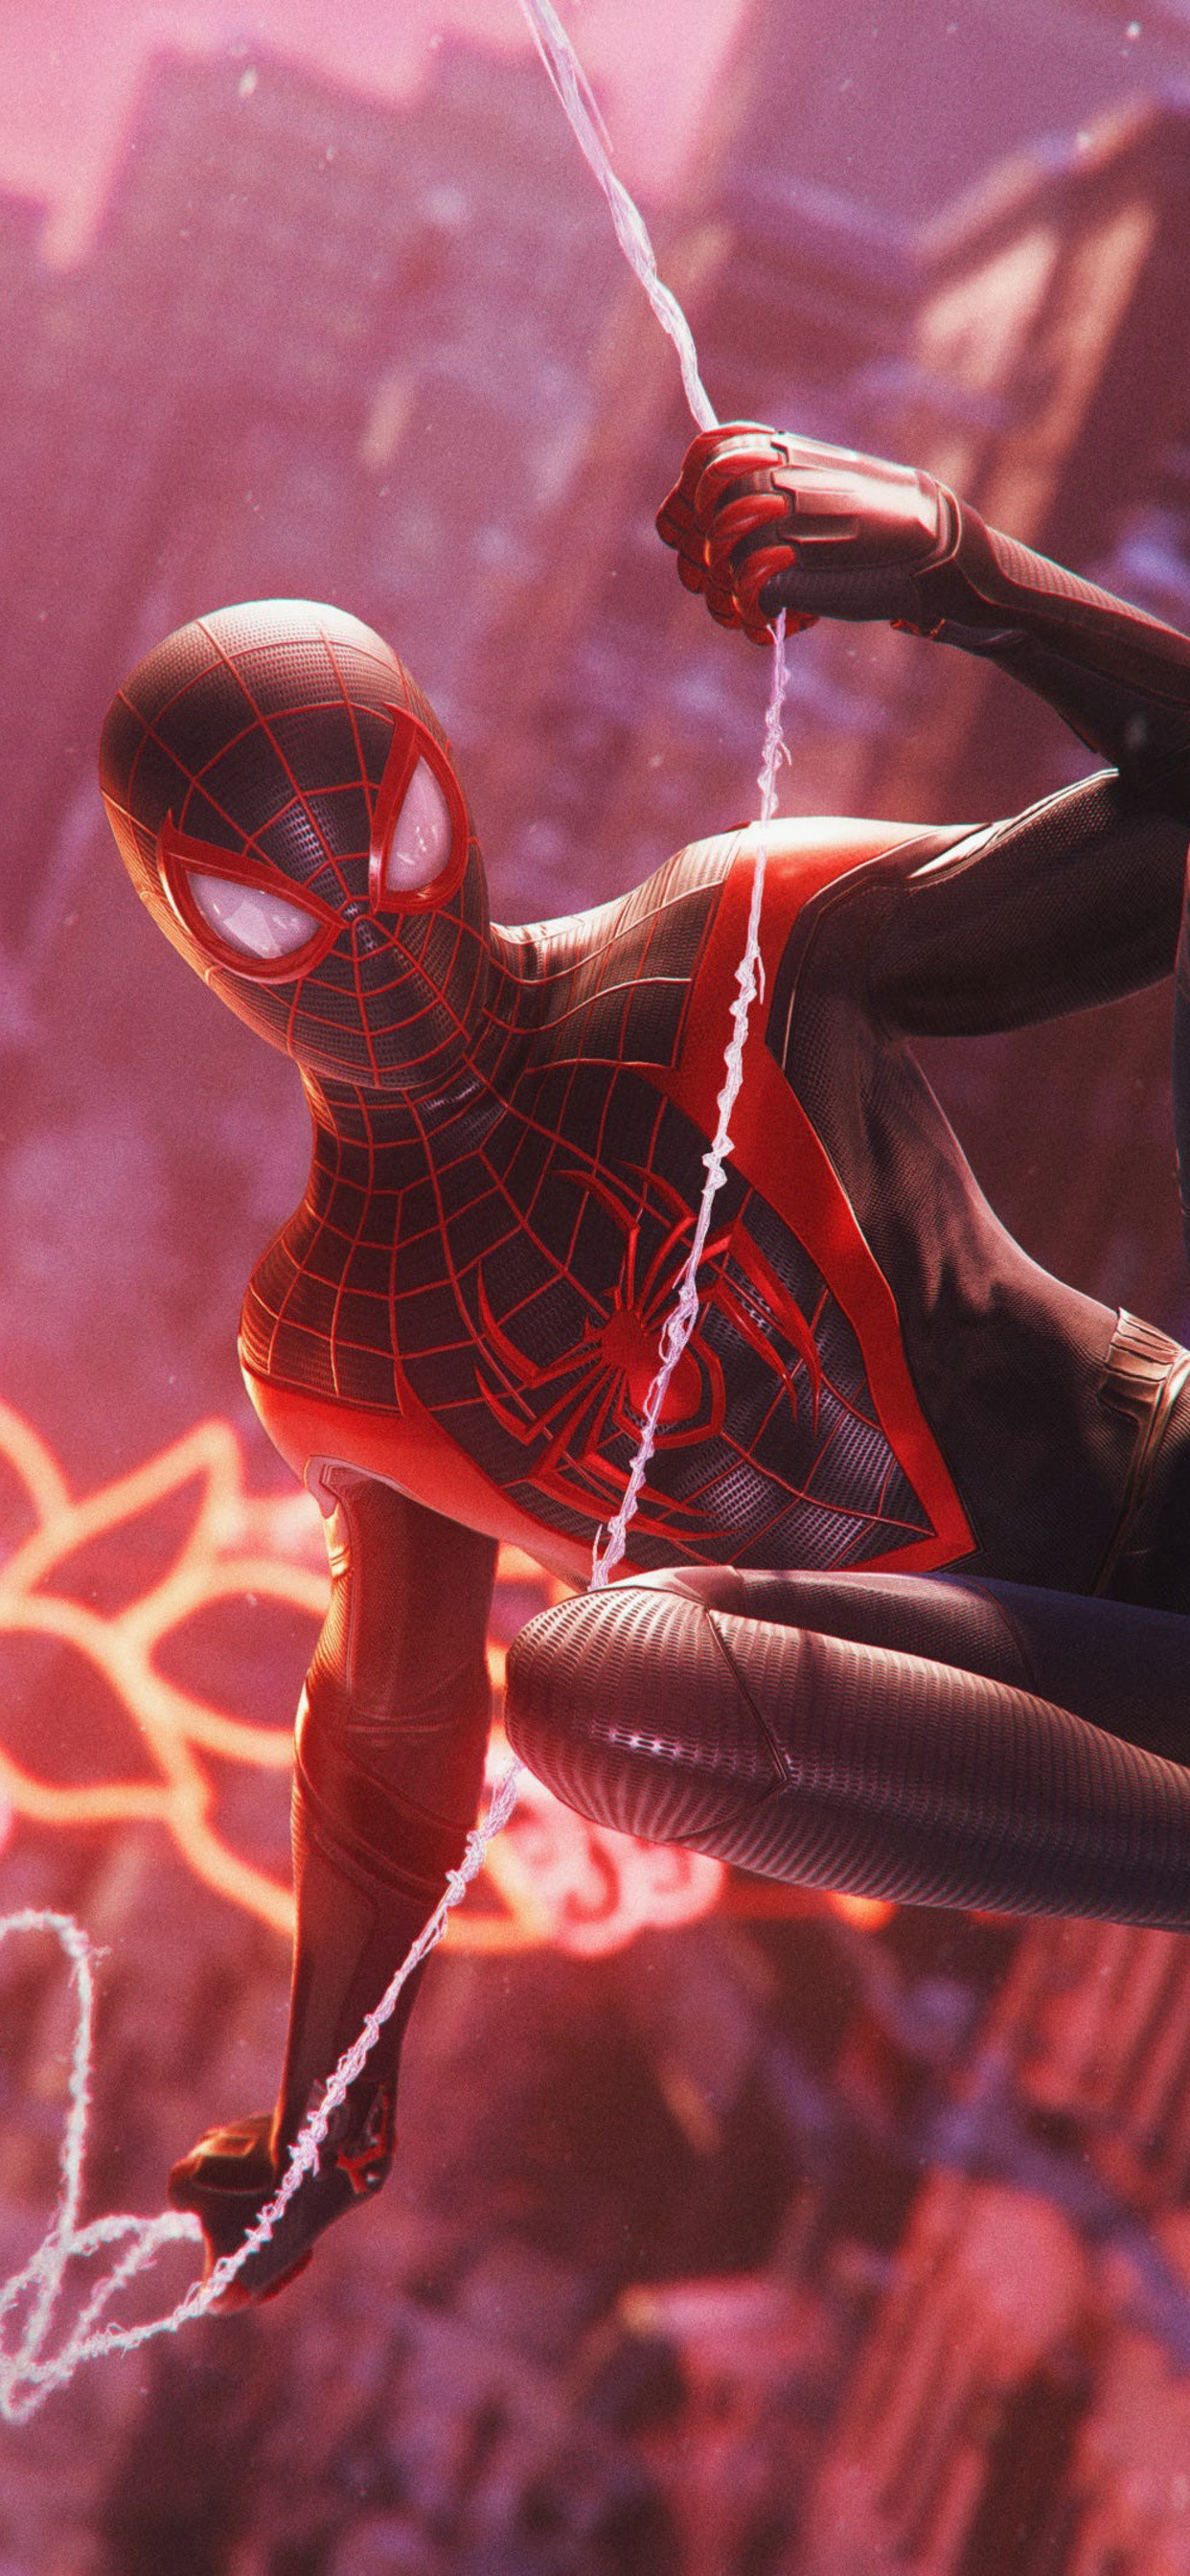 Spiderman Miles Morales swinging on a web in the air - 